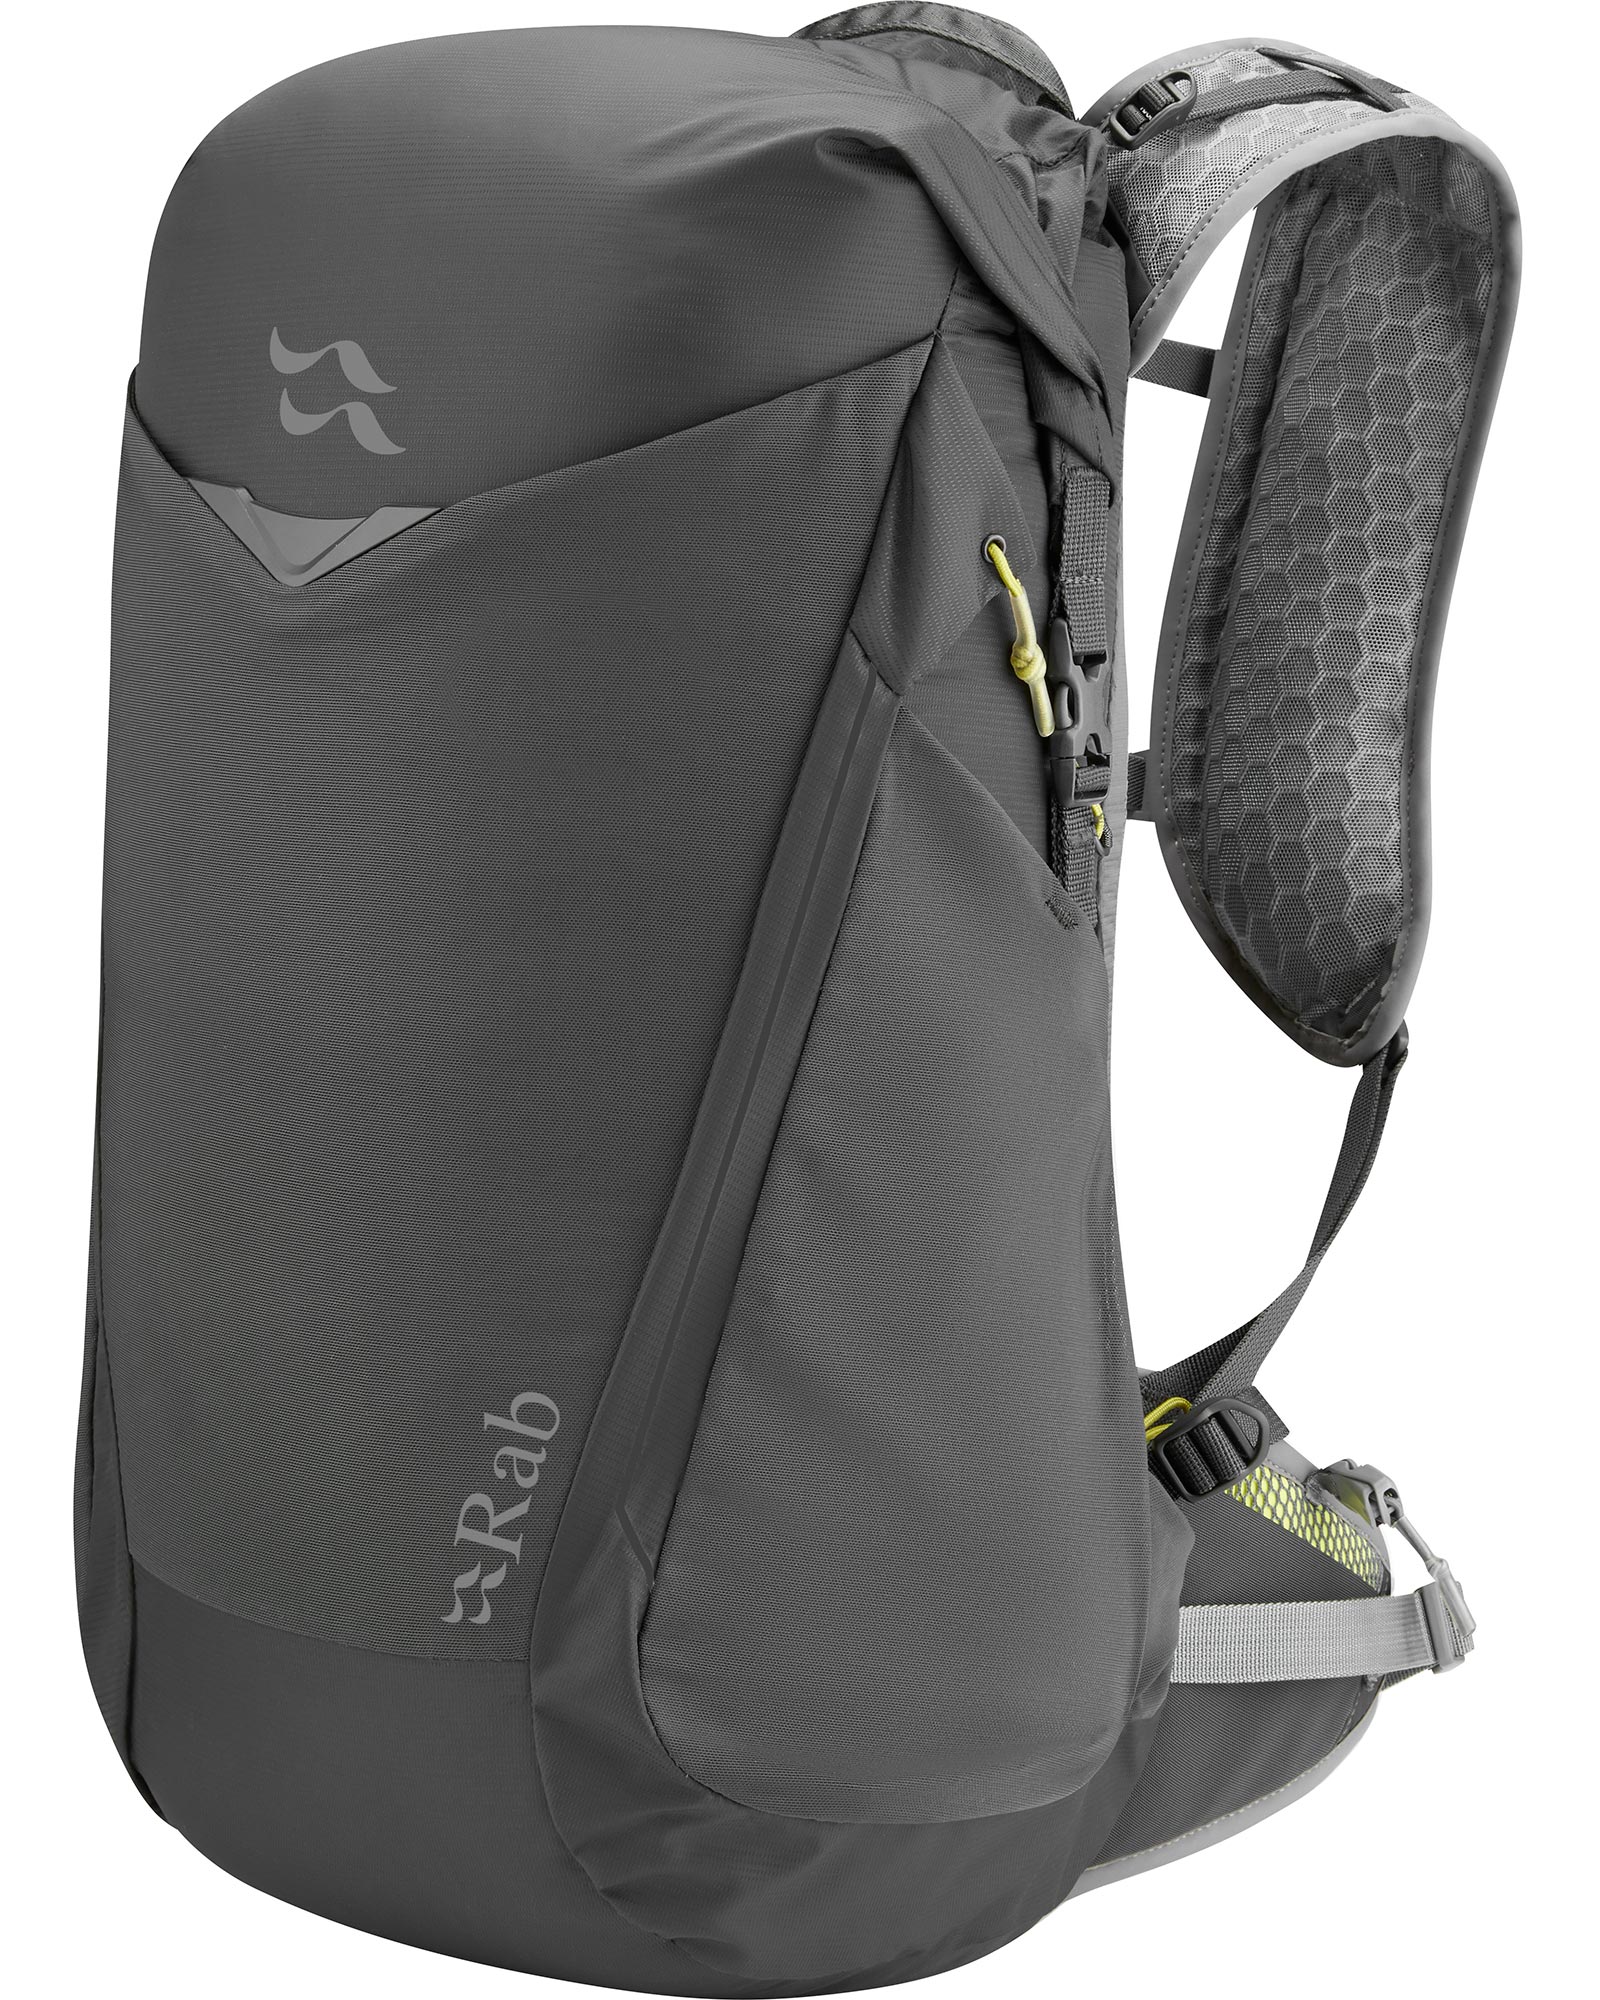 Rab Aeon Ultra 20 Backpack - Anthracite